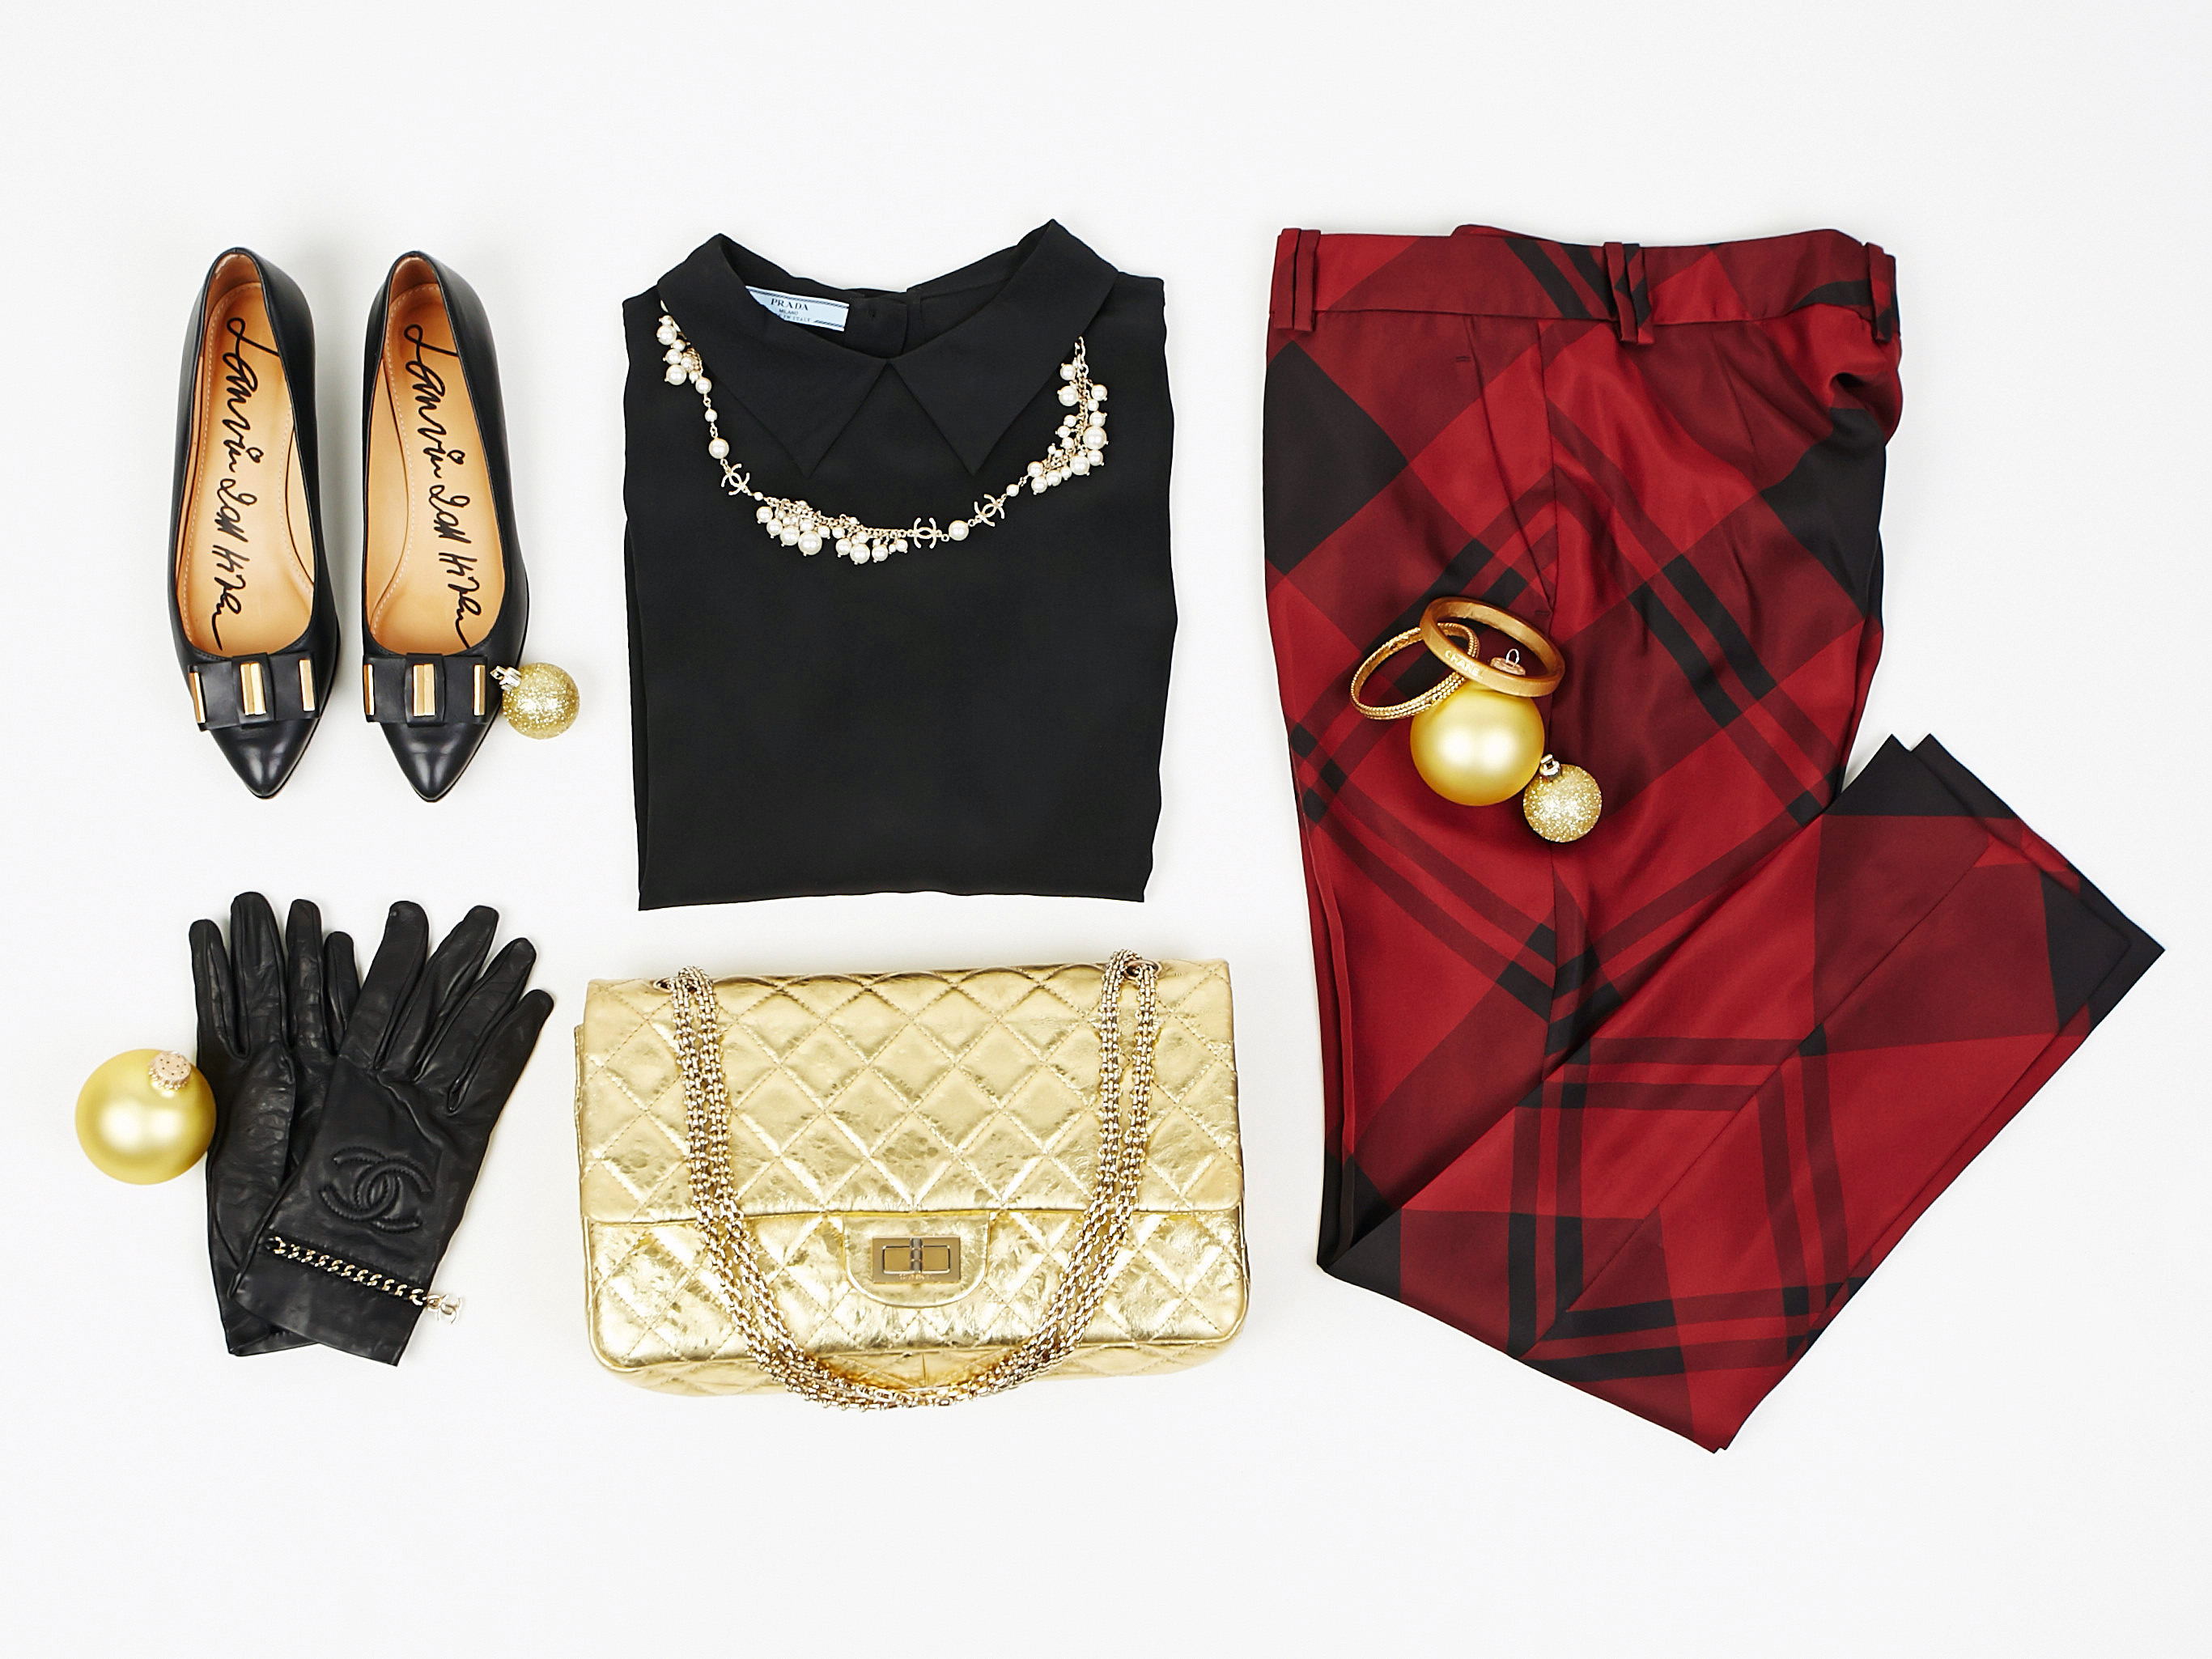 Holiday Party Outfit Ideas with Chanel 2.55 Flap Bag, Christian Louboutin Flats, and Plaid Trousers | Yoogi's Closet Authenticated Pre-Owned Luxury yoogiscloset.com